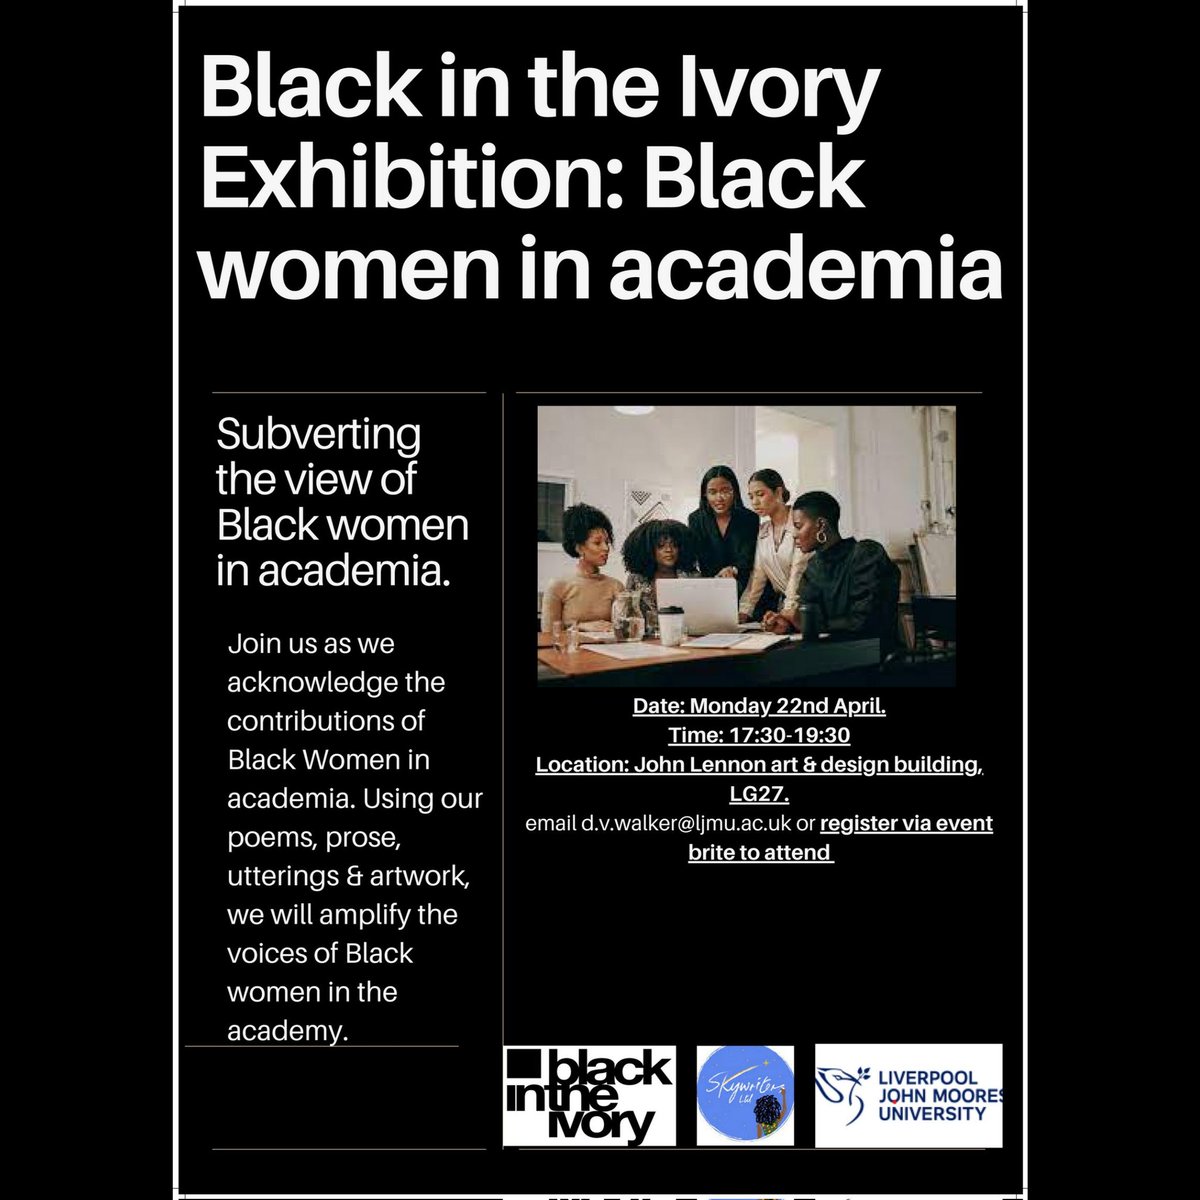 The project aim is to amplify the voices and contributions of Black women students, scholars & staff in the academy. We've worked on this project for months, and we're so excited to see the amazing Black women and their experiences centred and celebrated tonight! 💃🏾🙌🏿